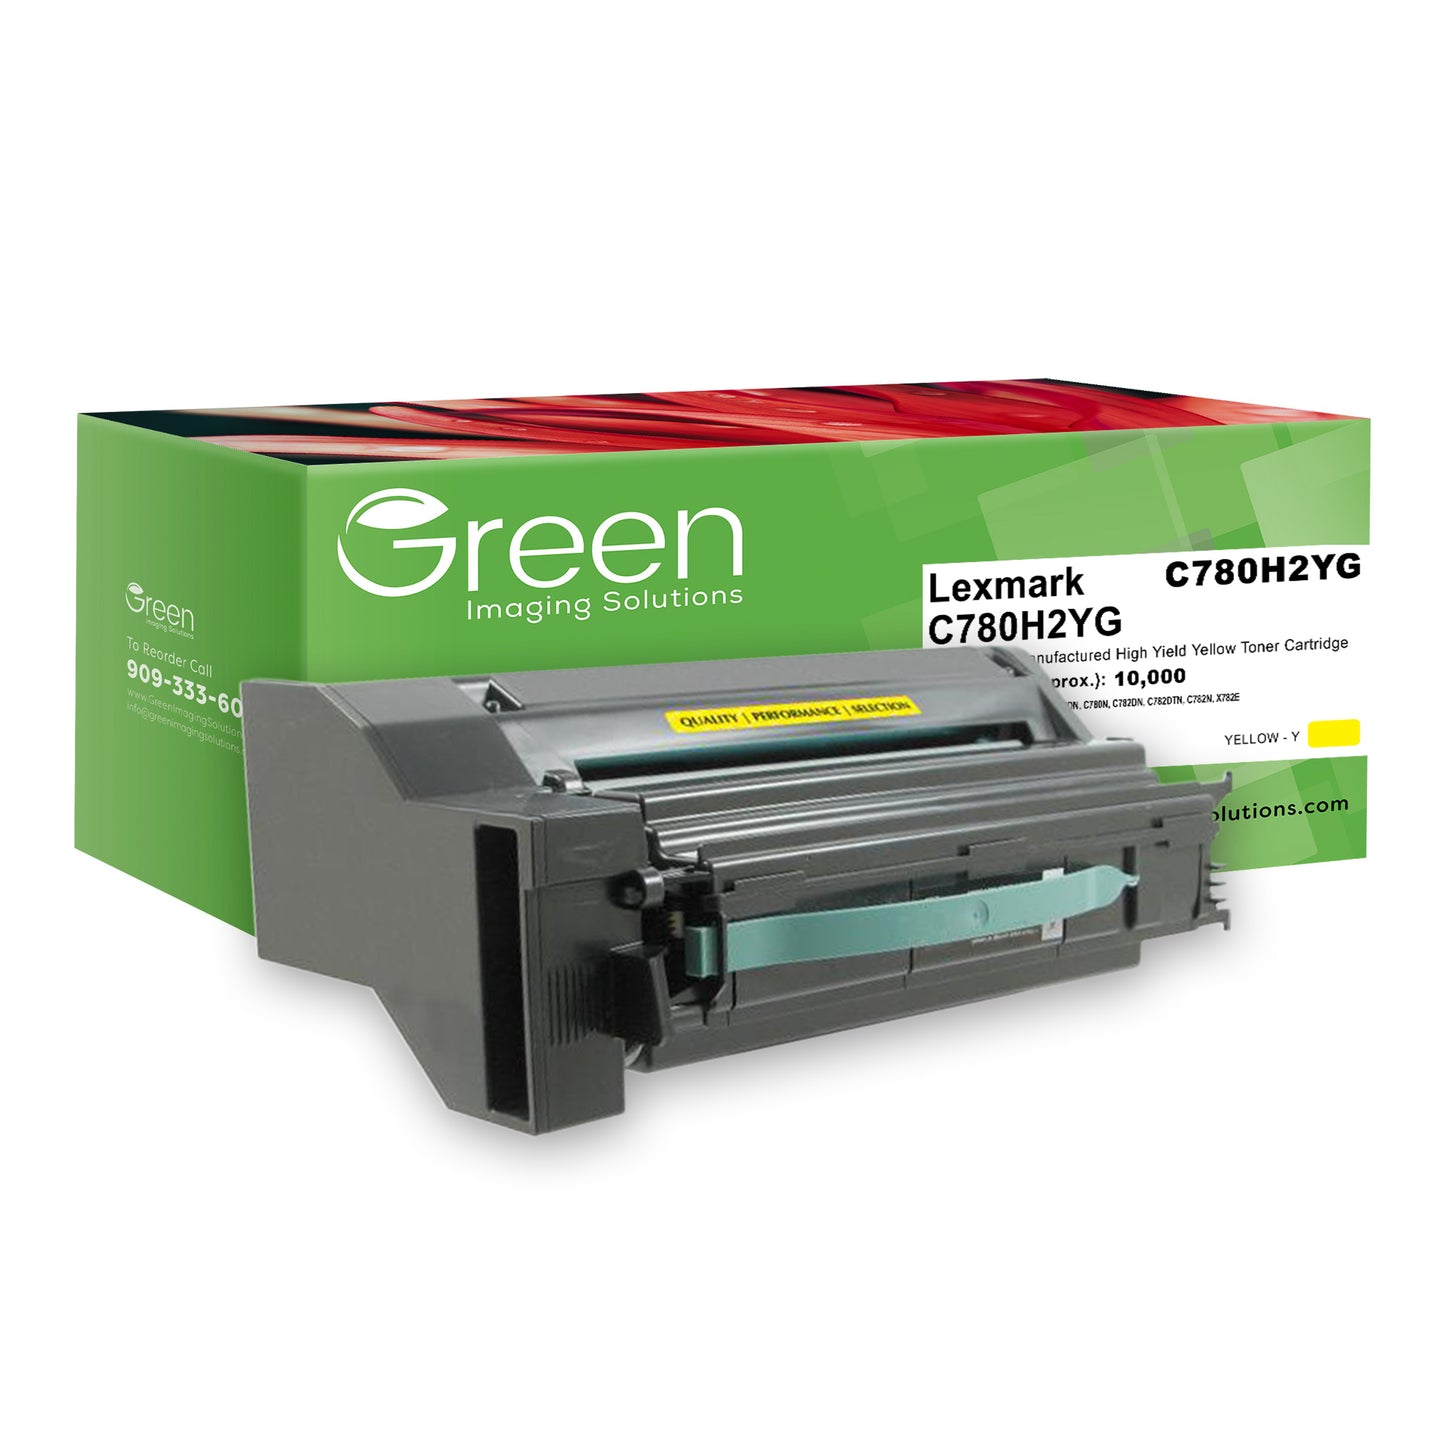 Green Imaging Solutions USA Remanufactured High Yield Yellow Toner Cartridge for Lexmark C780/C782/X782